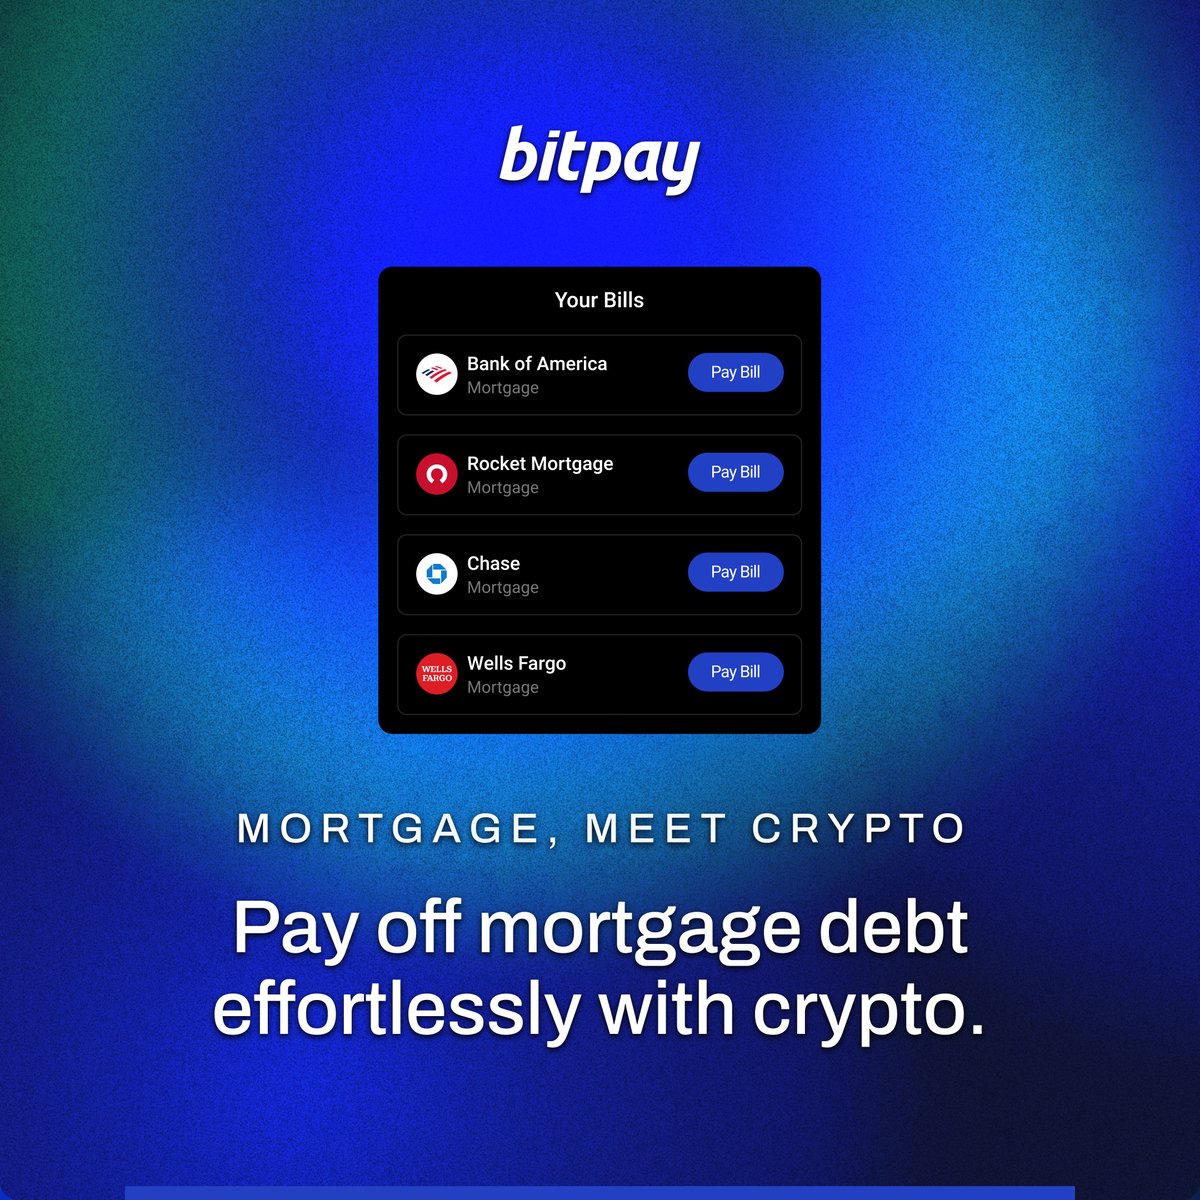 Use Bill Pay to pay your mortgage debt. ✅ Pay no fees until 6/30 ✅ Practically any mortgage lender ✅ 100+ crypto supported - BTC, LTC, ETH, DOGE + more ✅ Wipe mortgage debt monthly or all in one transaction Get started: bitpay.onelink.me/Cenw/741iawkm #BitPay #Bitcoin #crypto